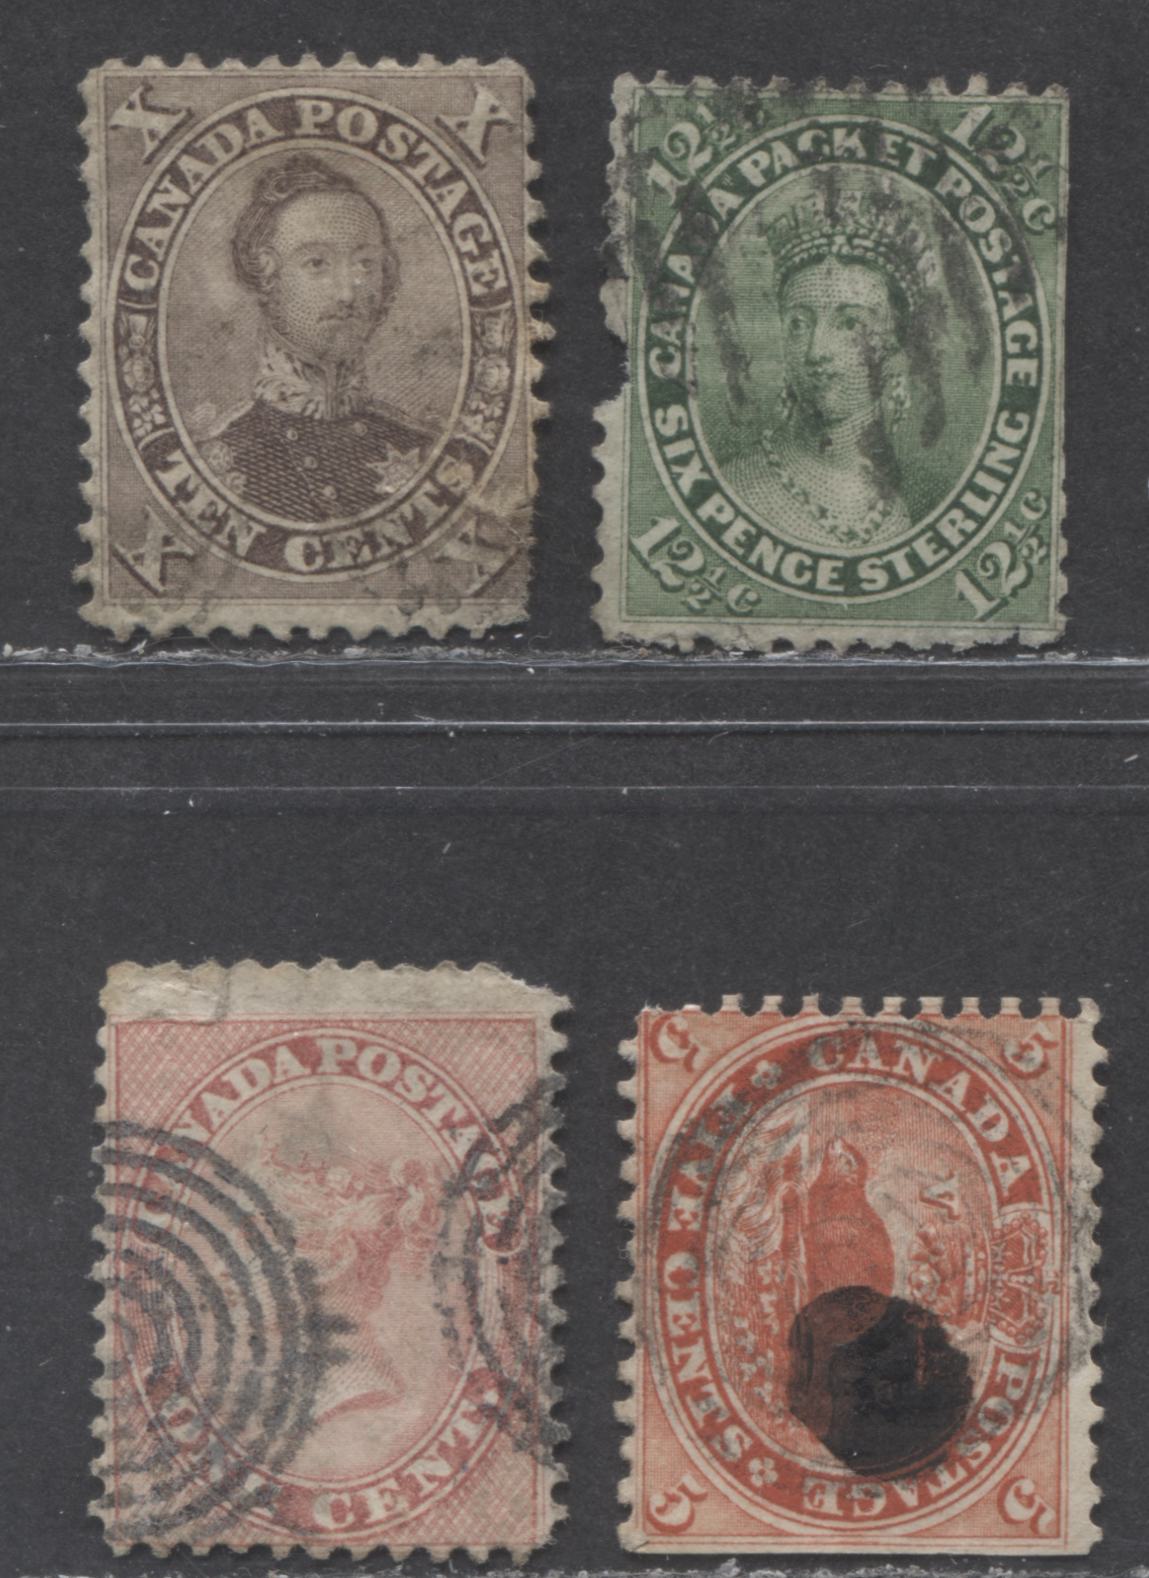 Lot 58 Canada #14, 15, 17, 18 1c - 12.5c Rose - Yellow Green Queen Victoria, Beaver & HRH Prince Albert, 1859-1864 First Cents Issue, A Study Lot Of 4 Ungraded Singles